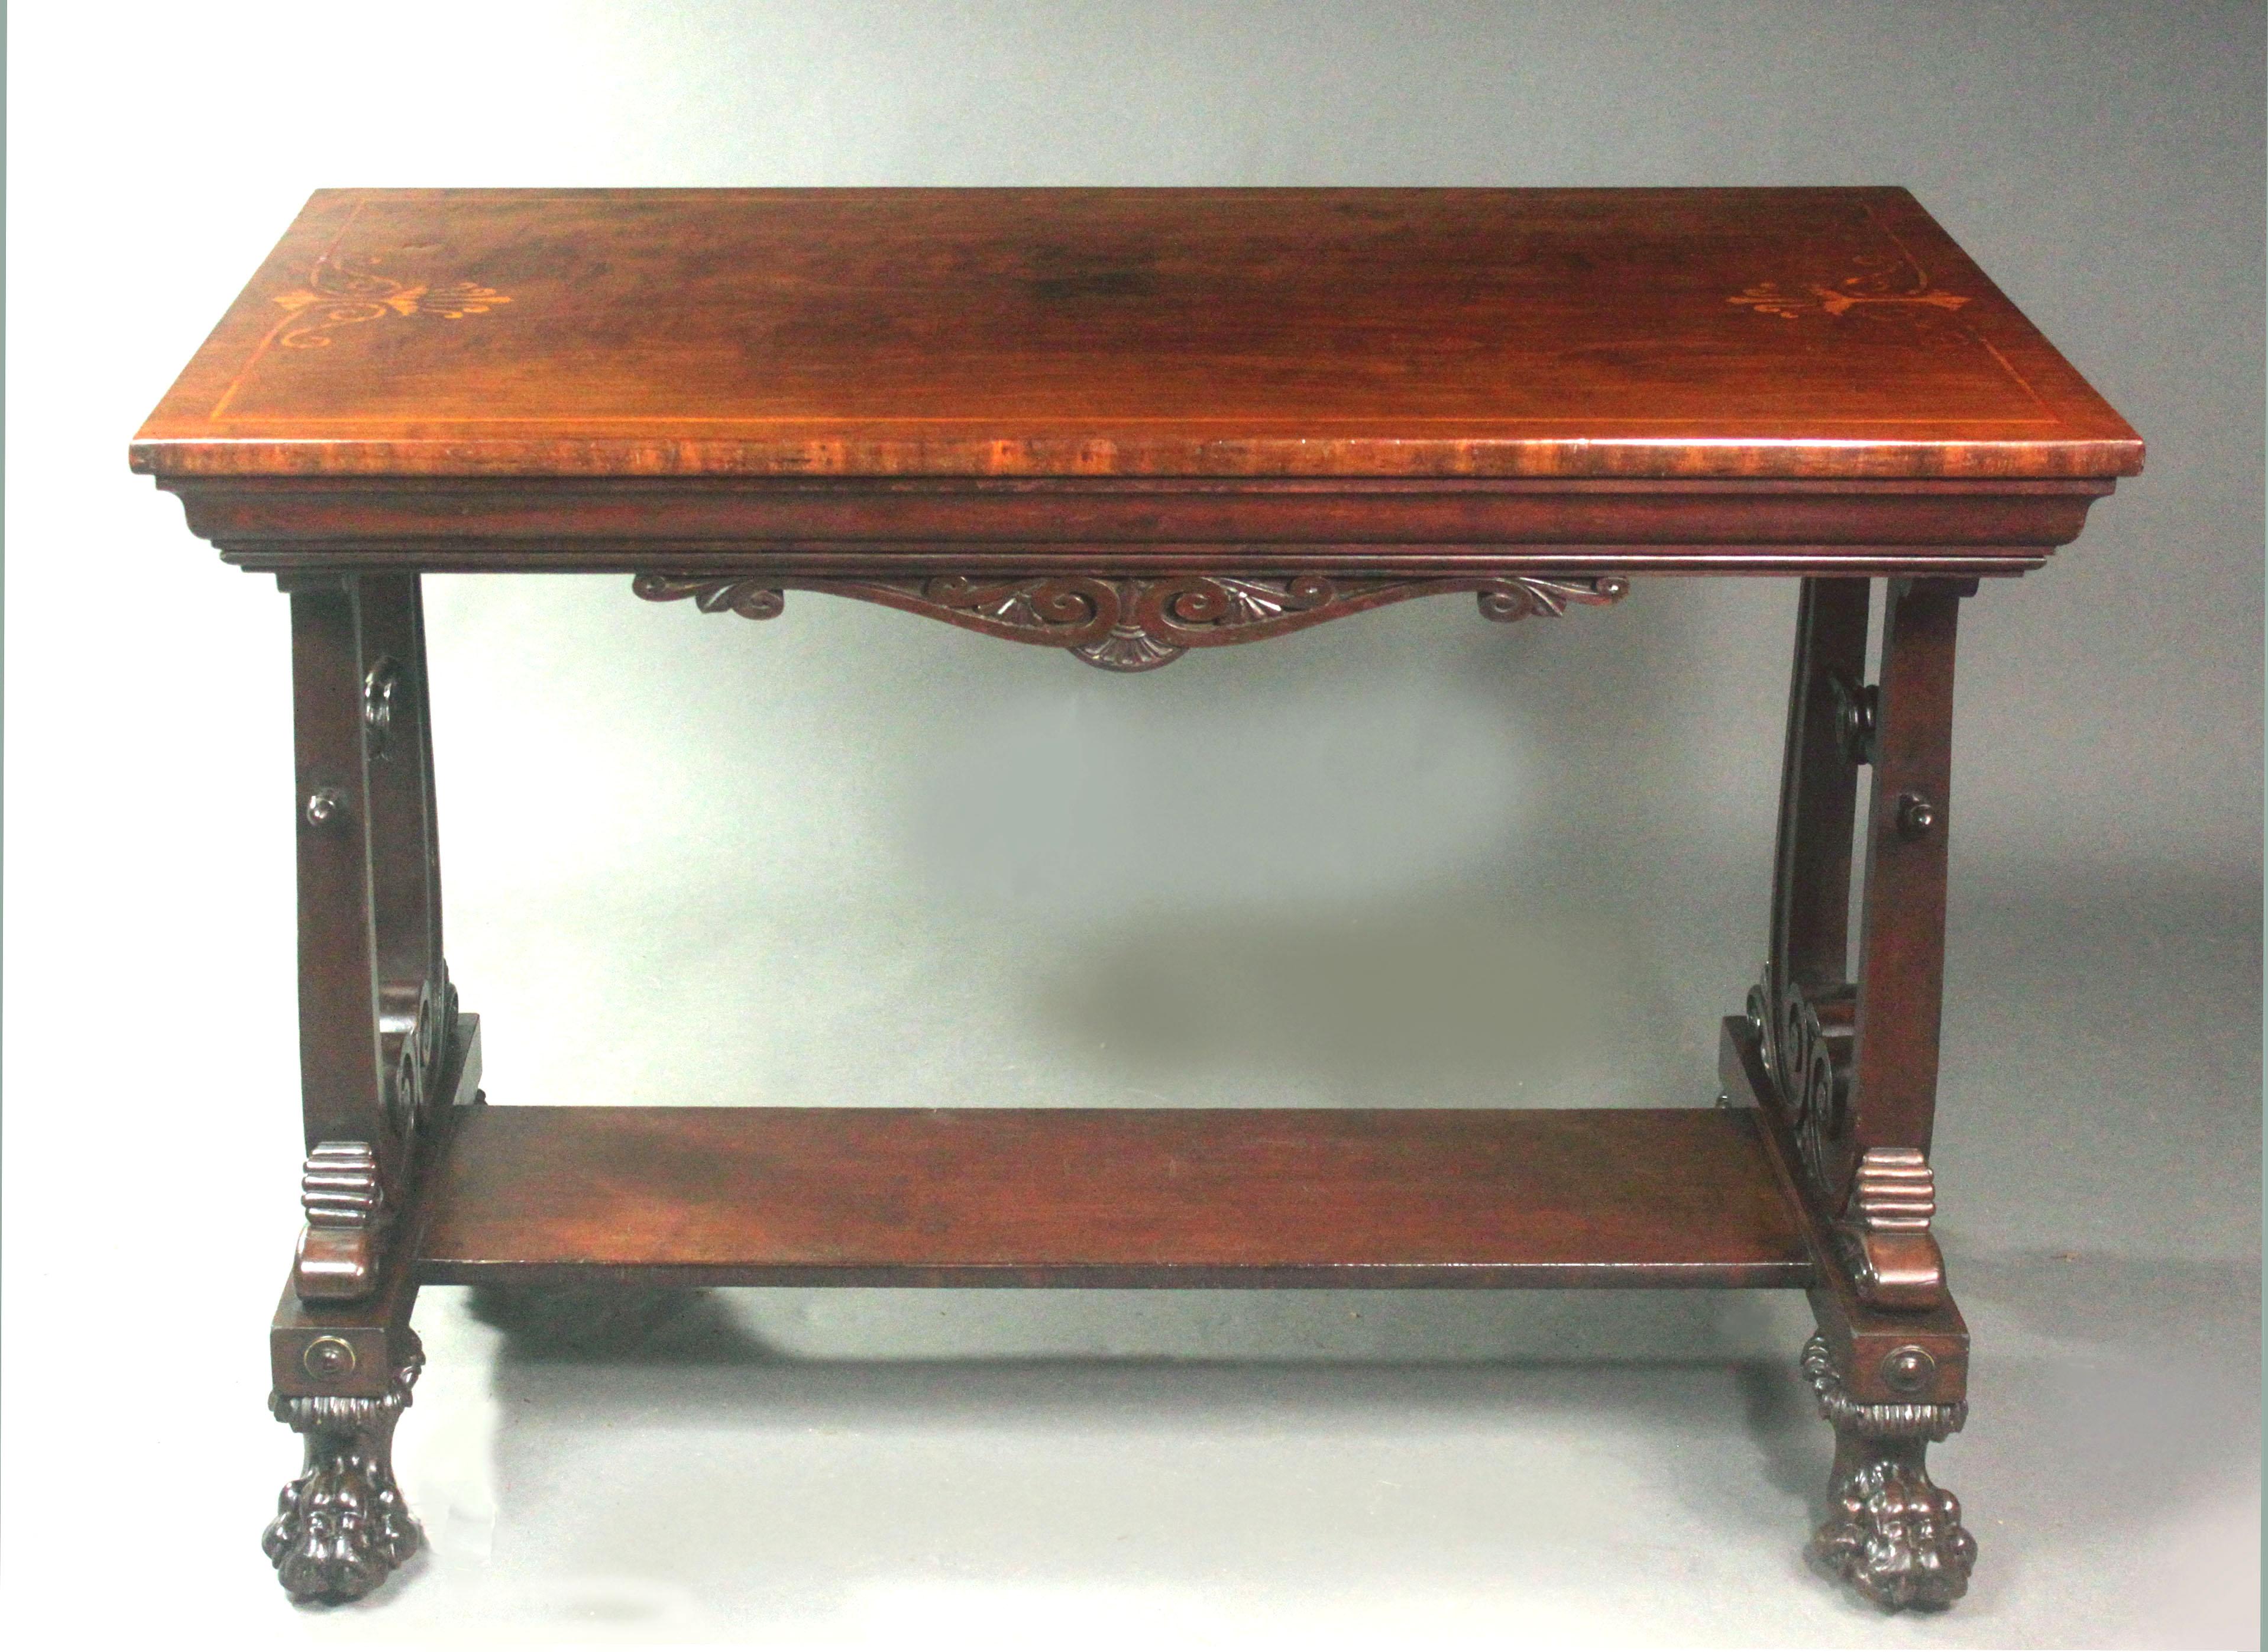 A Regency mahogany centre table in the manner of George Smith with fine detail: the top with inlaid anthemions in satinwood, the frieze with carving and ogee moulding, the standard ends formed with large S-scrolls, platform base and handsome carved